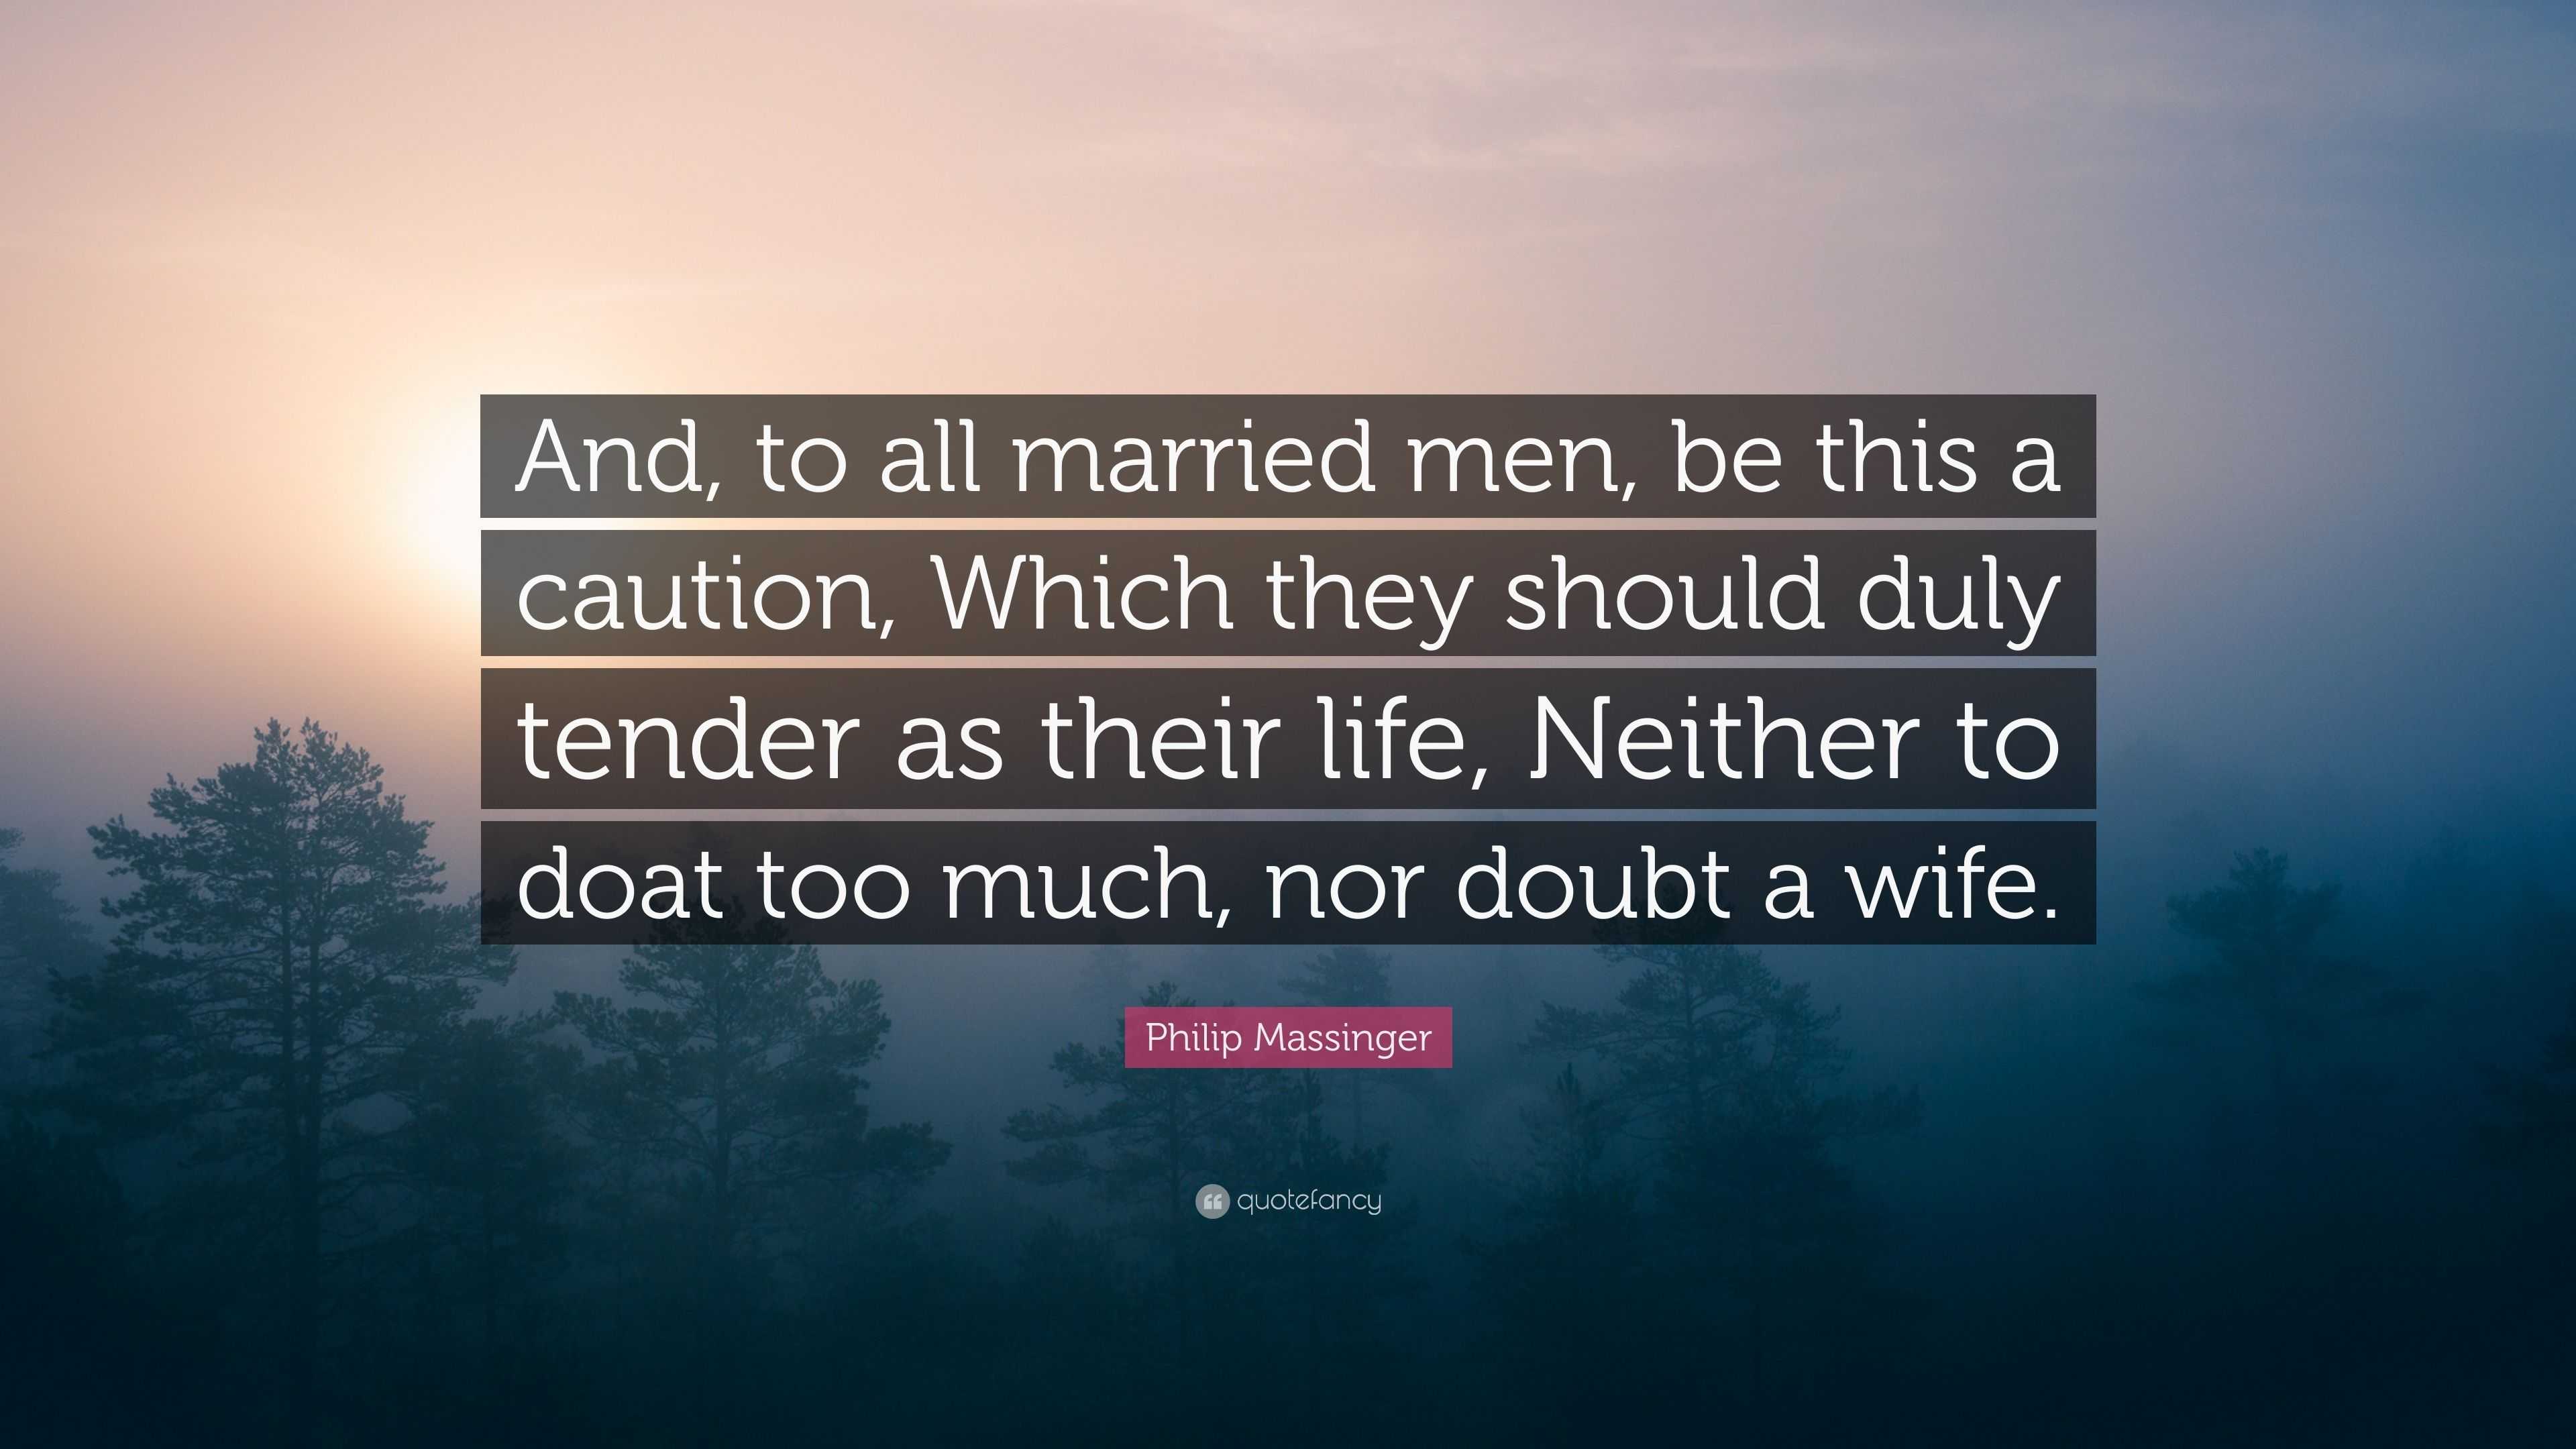 Philip Massinger Quote And To All Married Men Be This A Caution Which They Should Duly Tender As Their Life Neither To Doat Too Much Nor D 7 Wallpapers Quotefancy